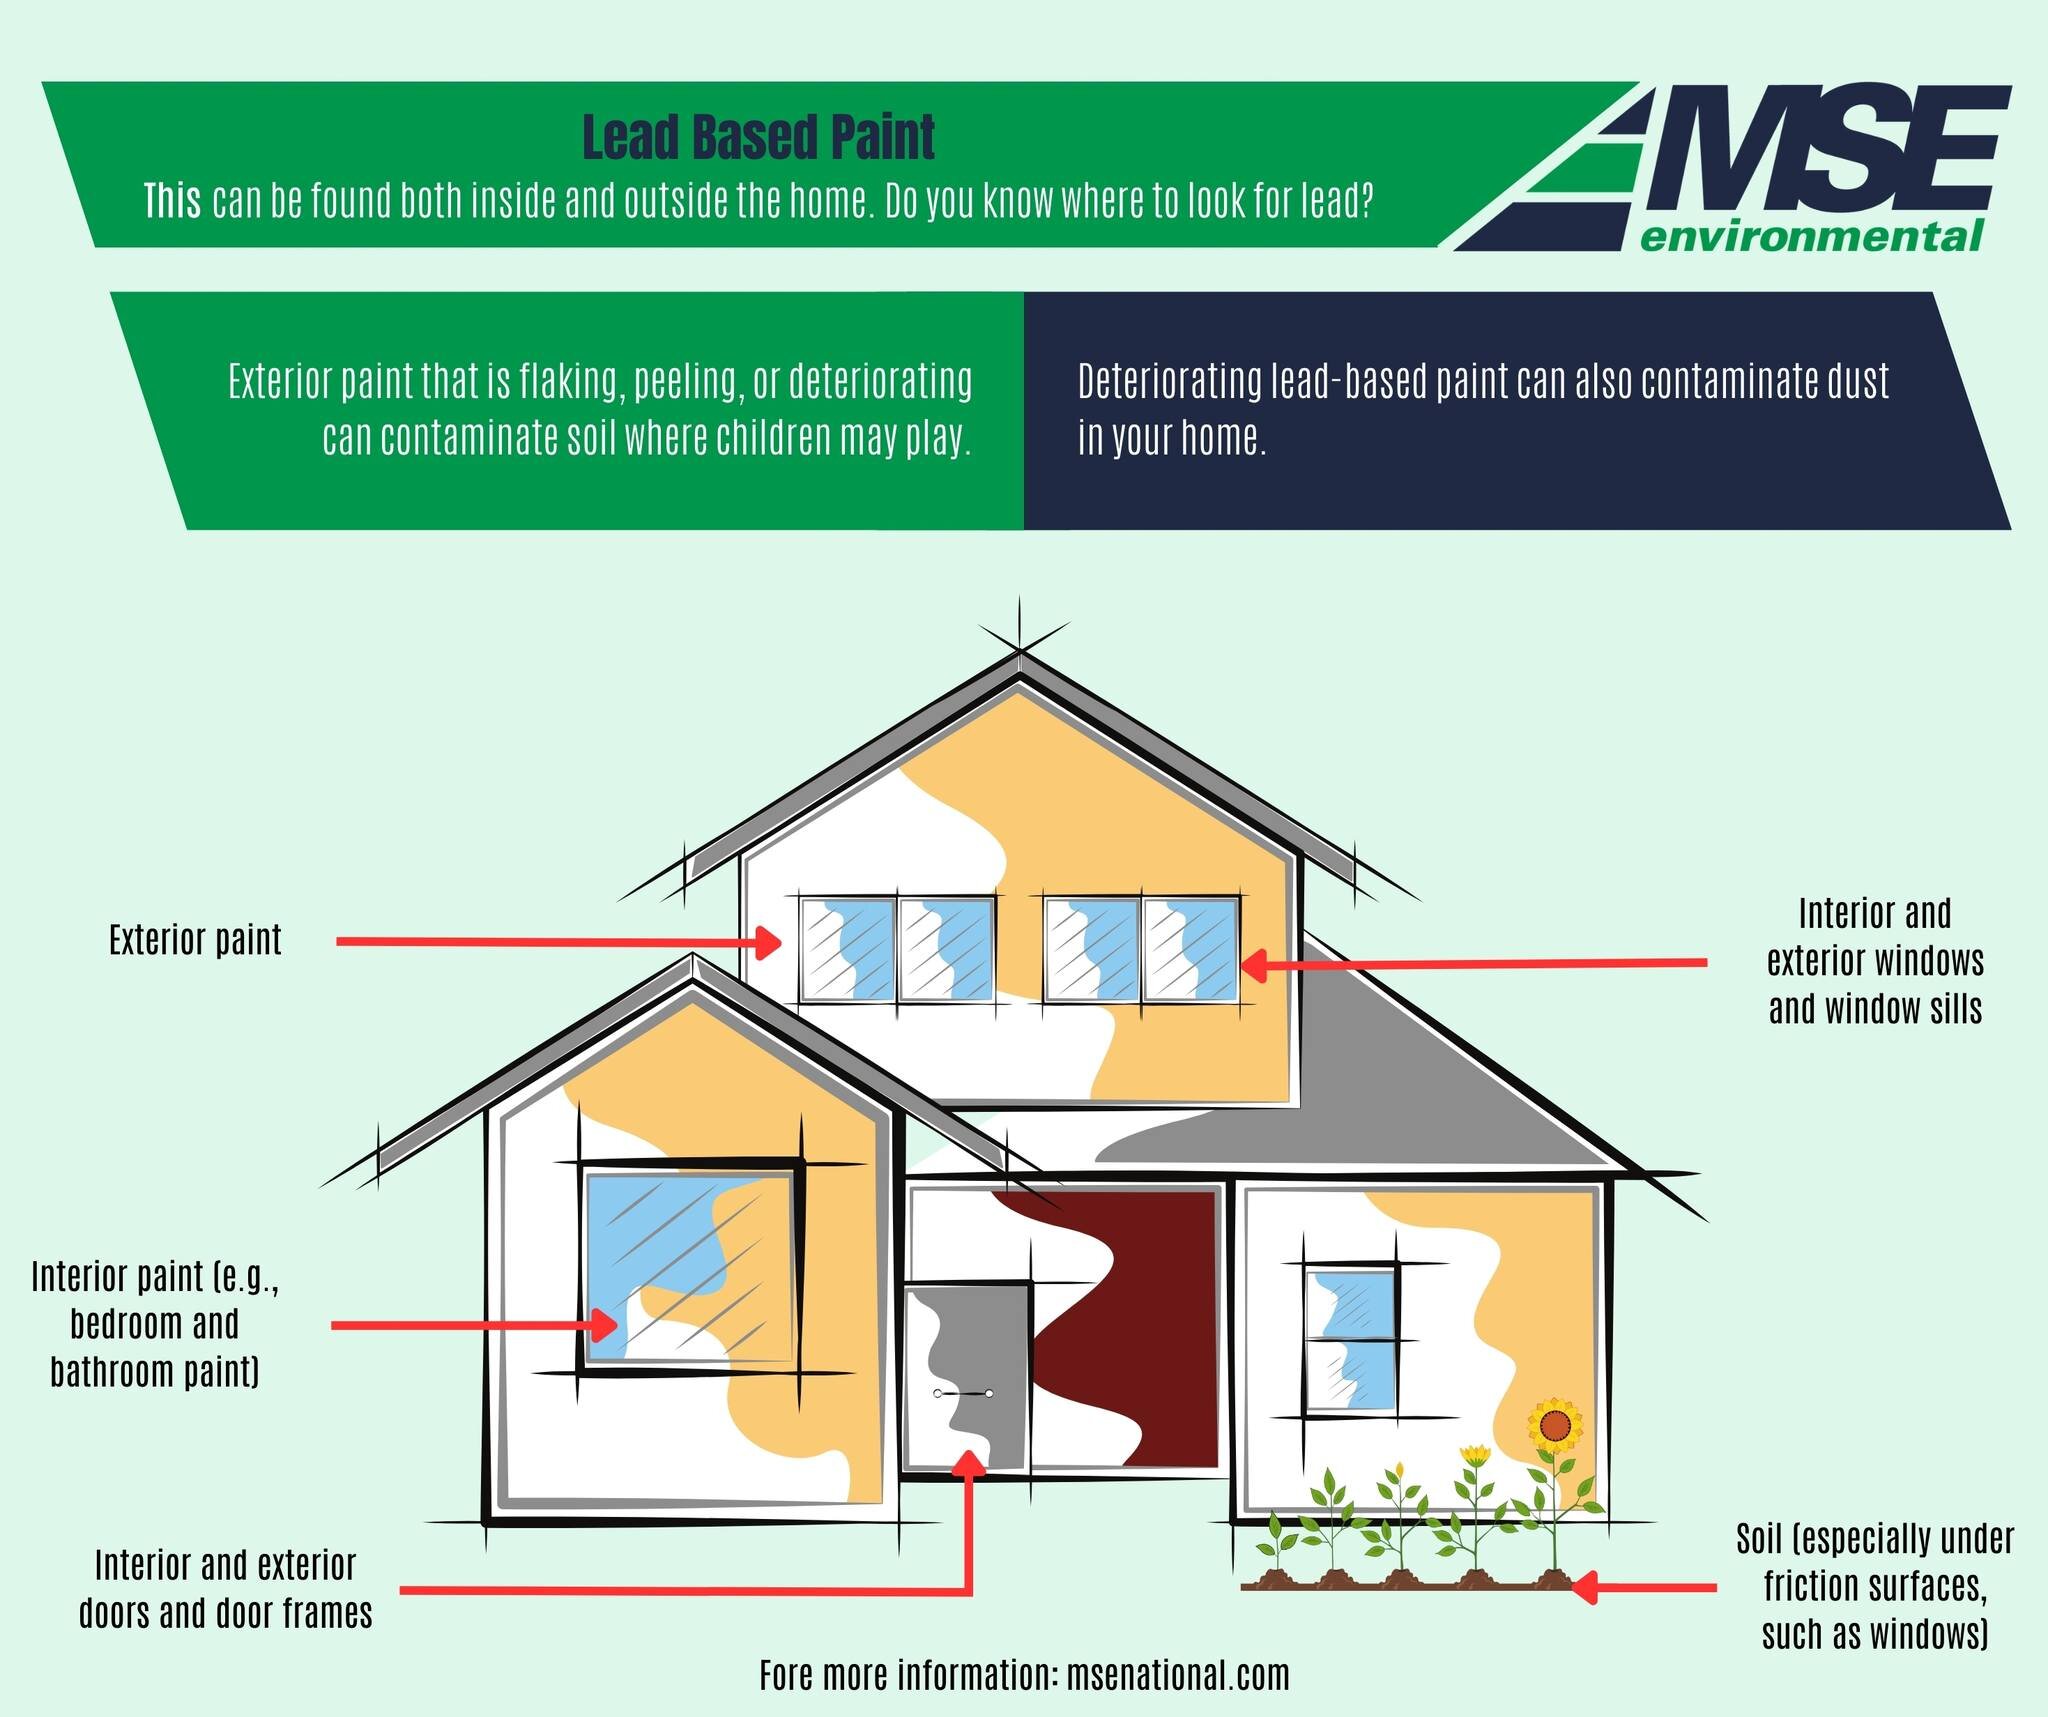 Beware of Lead-Based Paint!

Lead-based paint, once common in older homes, poses serious health risks, especially to children. Stay informed, conduct inspections, and take necessary precautions to ensure a safe living environment. 

#MSEenvironmental